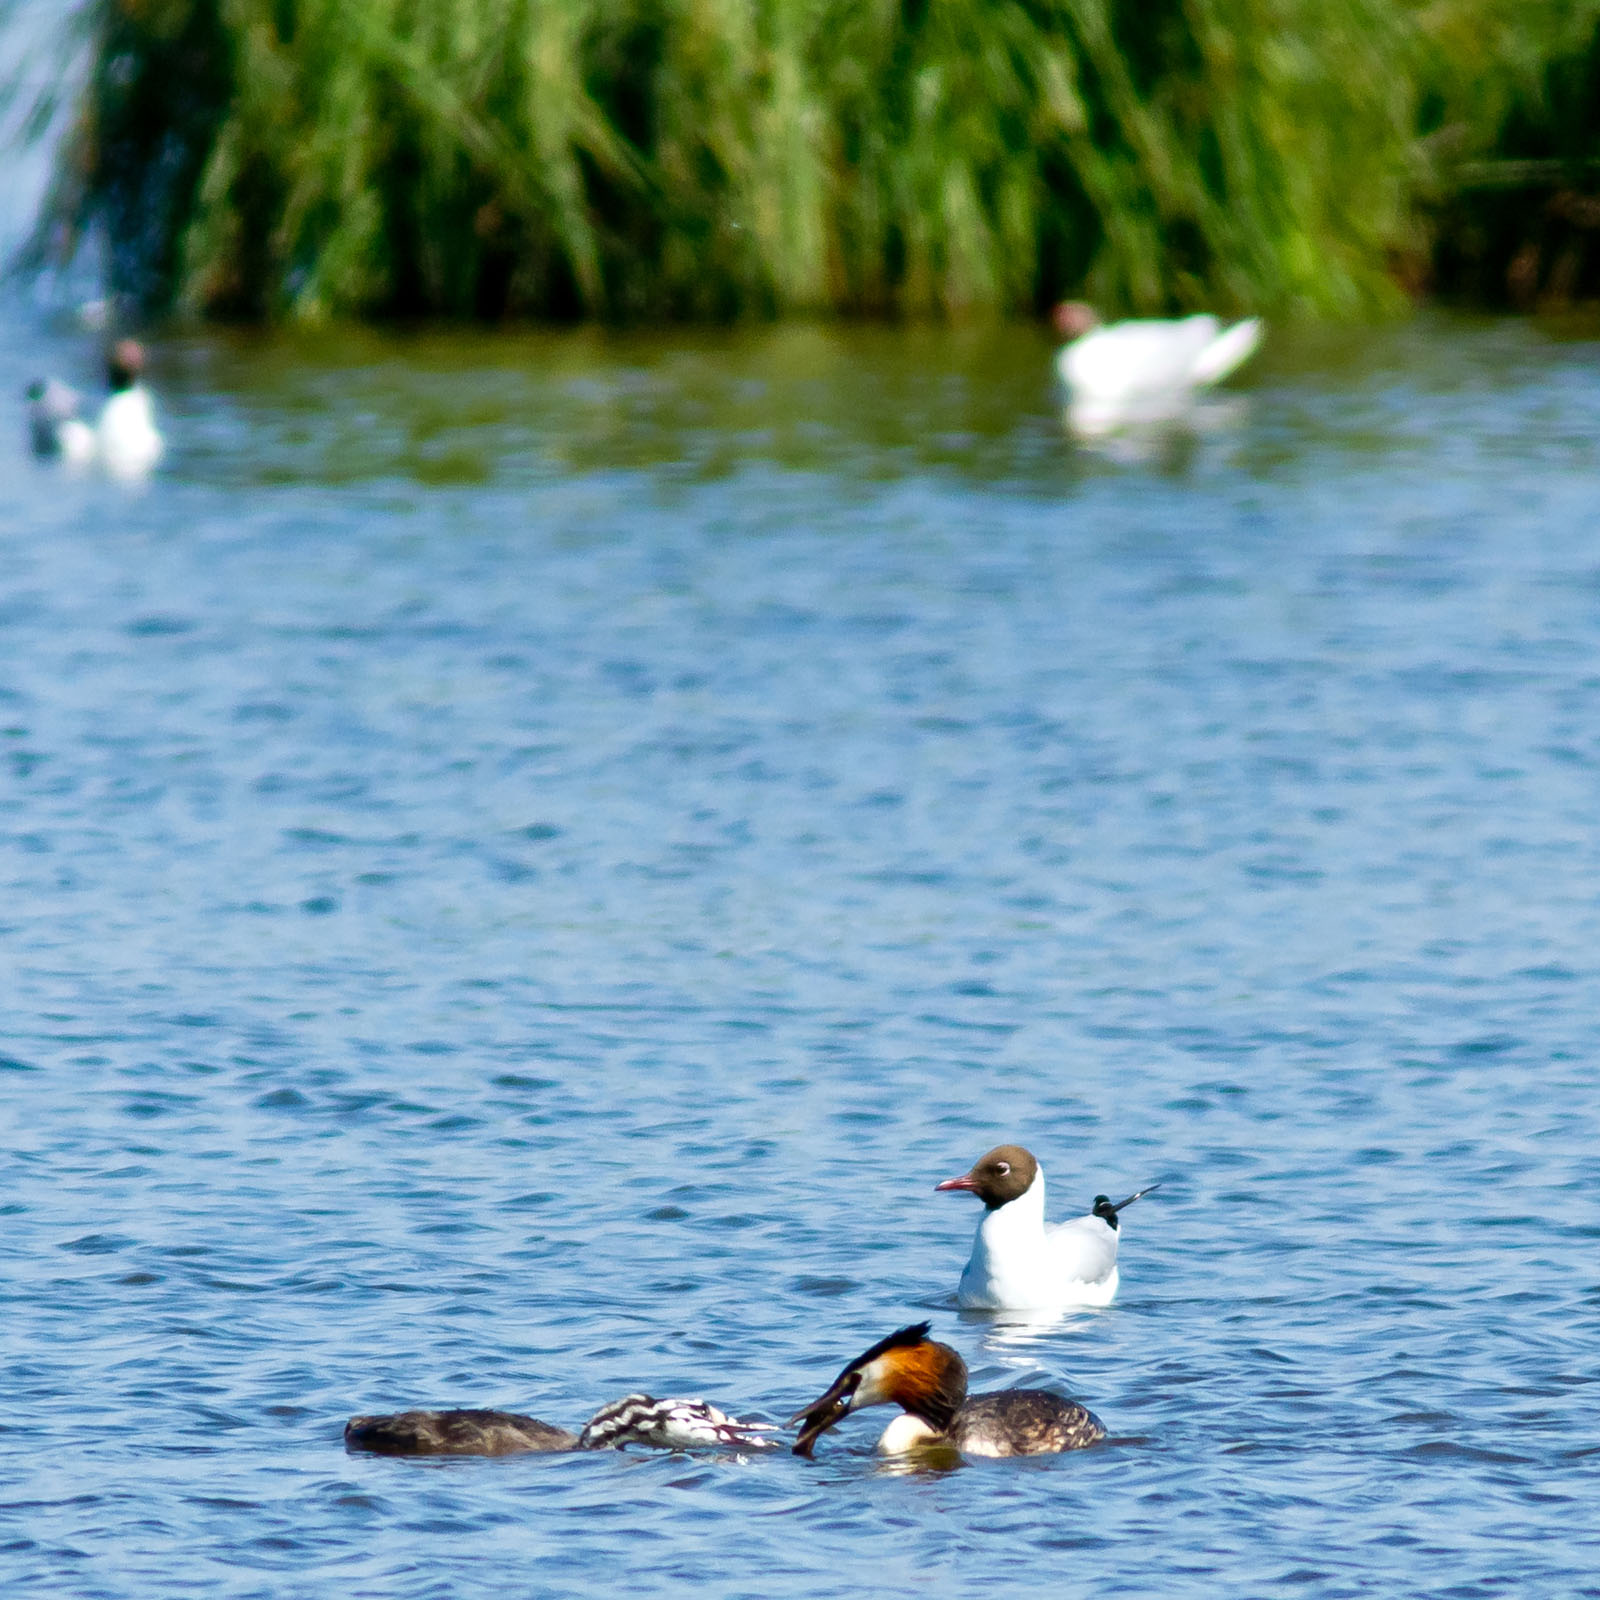 /Guewen/galeries/public/Nature/France/Grebes_Brenne/Grebes_004.jpg